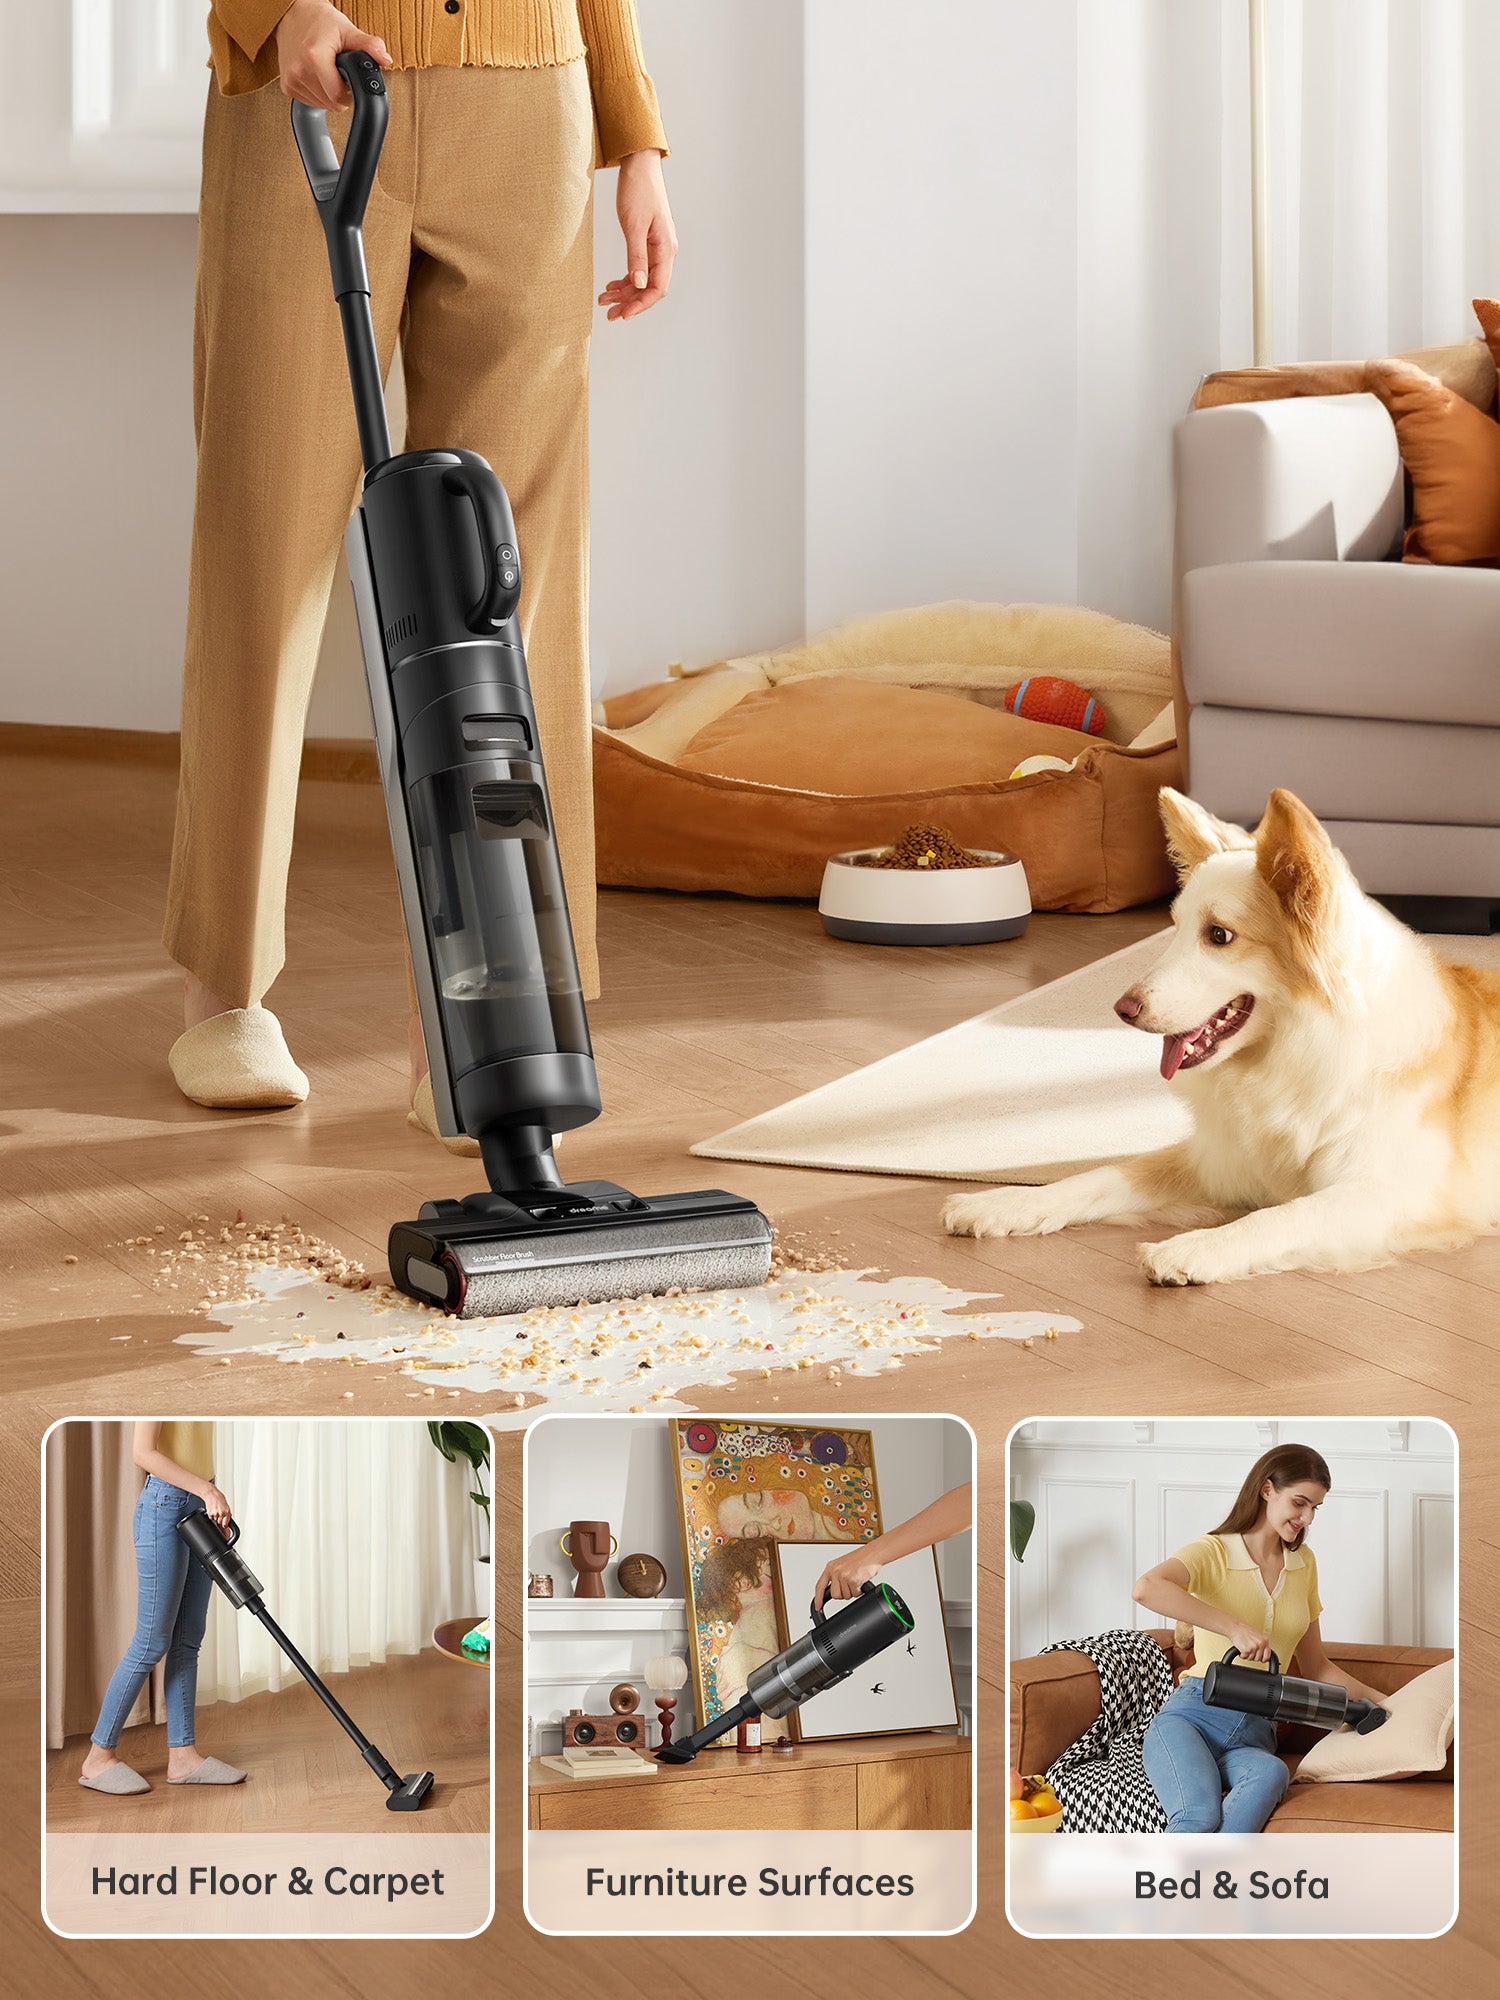 Dreame H12 Wireless Vacuum Cleaner